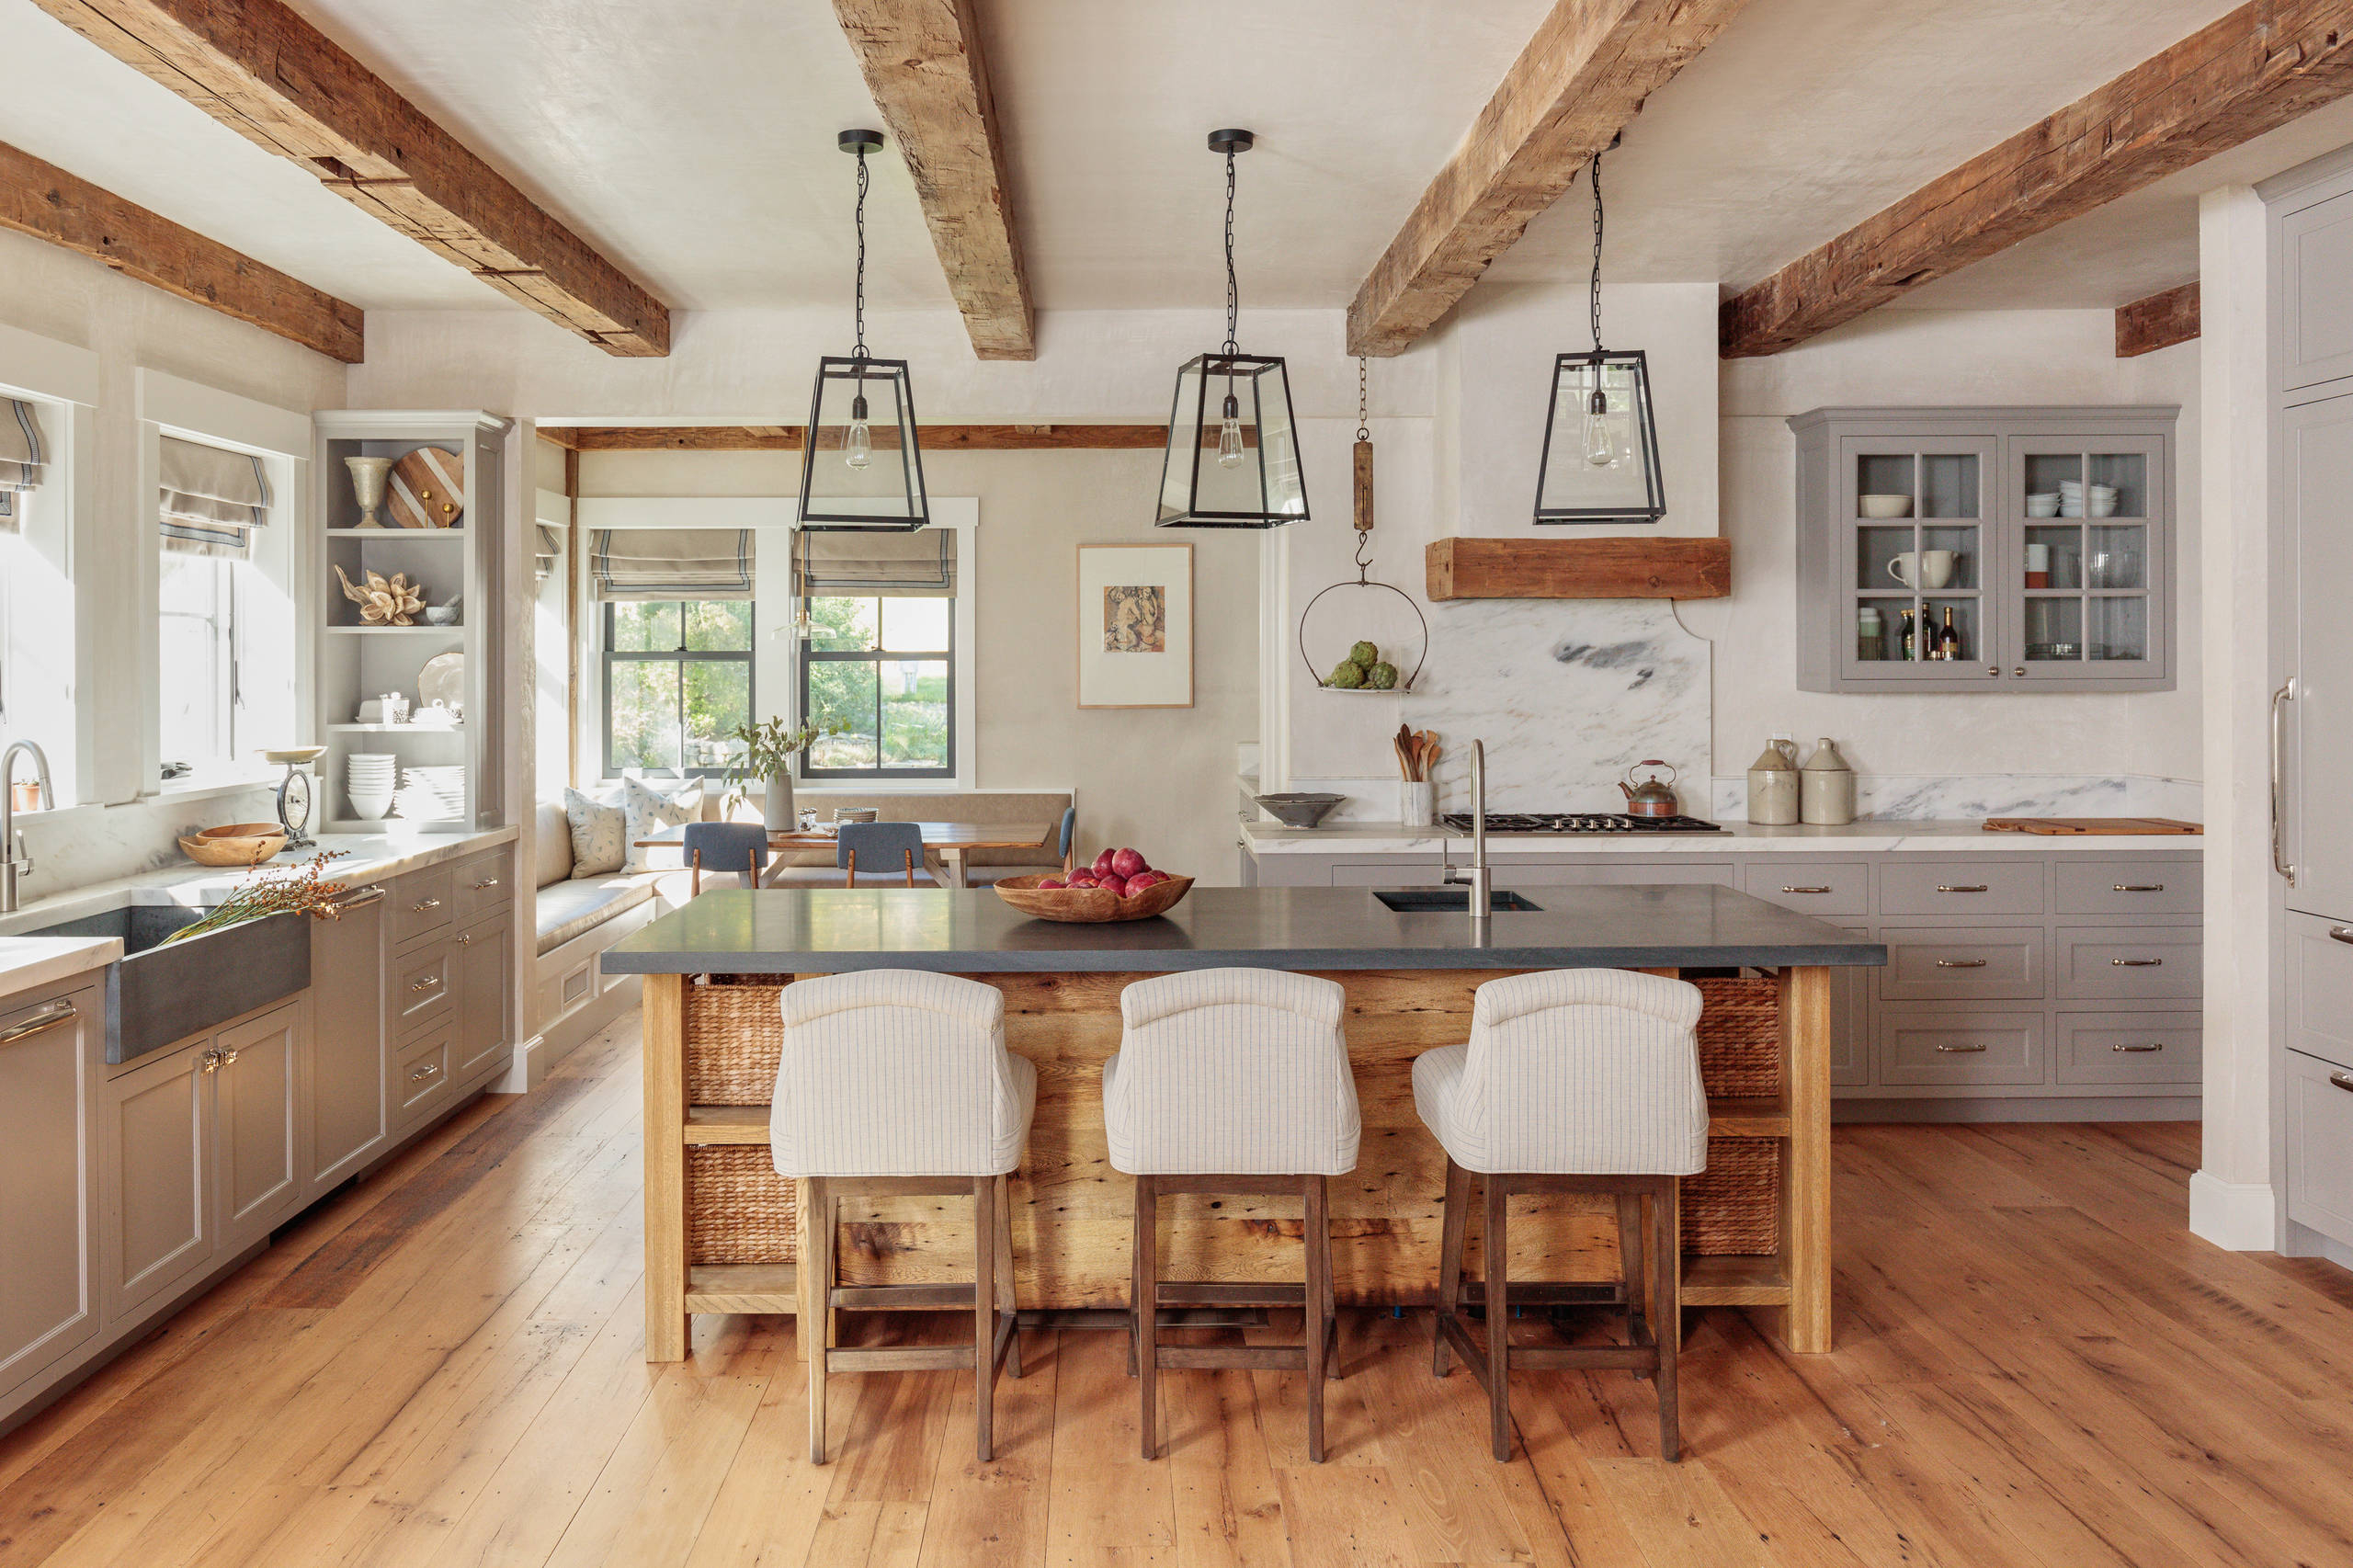 https://foter.com/photos/424/kitchen-with-exposed-horizontal-ceiling-beams.jpg